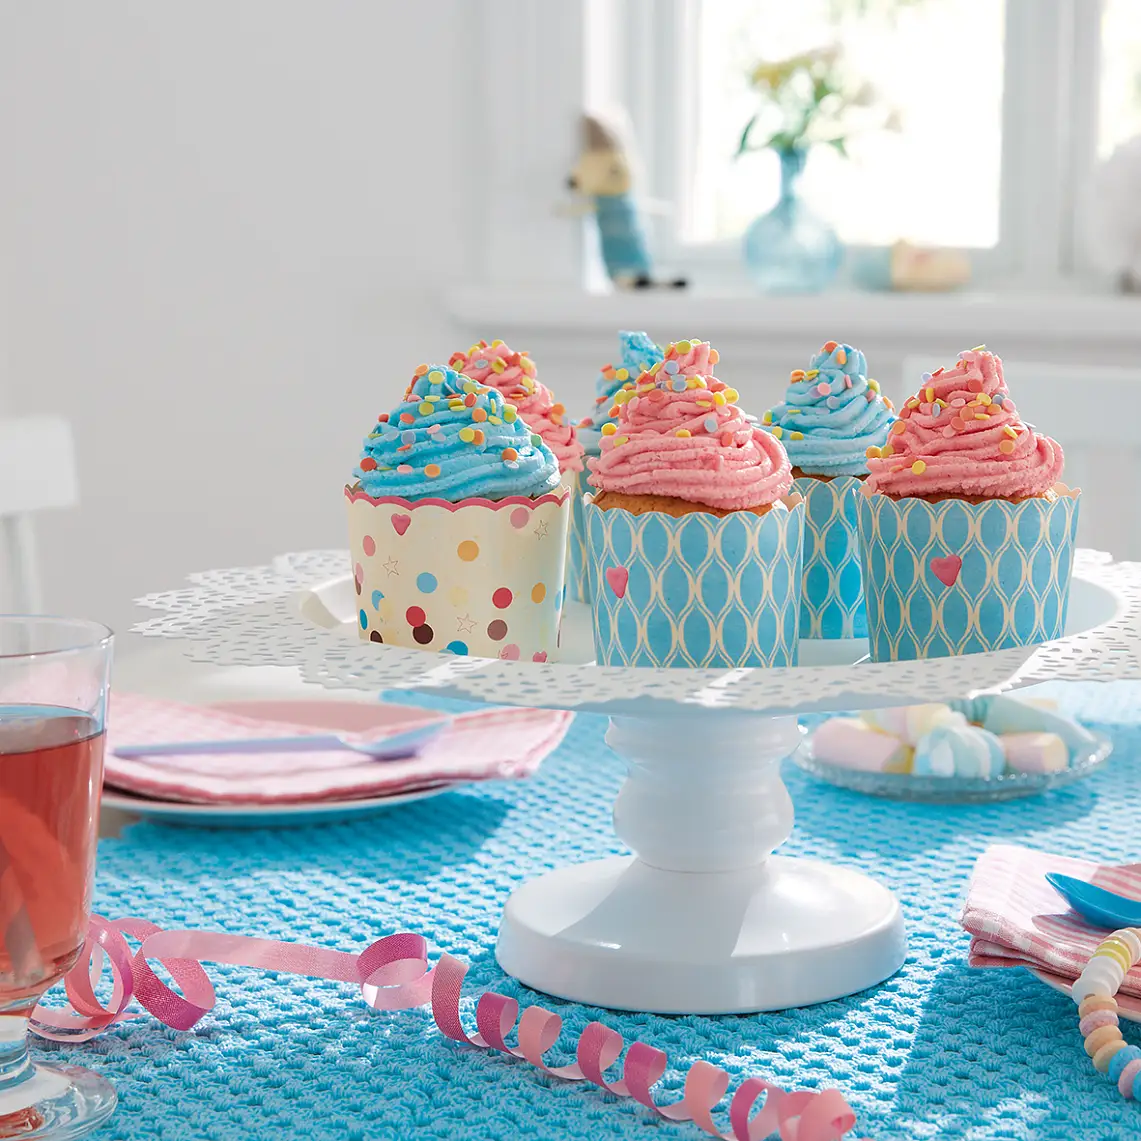 tesa Powerbond® INDOOR can be used for so much more than mounting pictures. Use it to create your own cake stand and show off your home-made muffins in style.